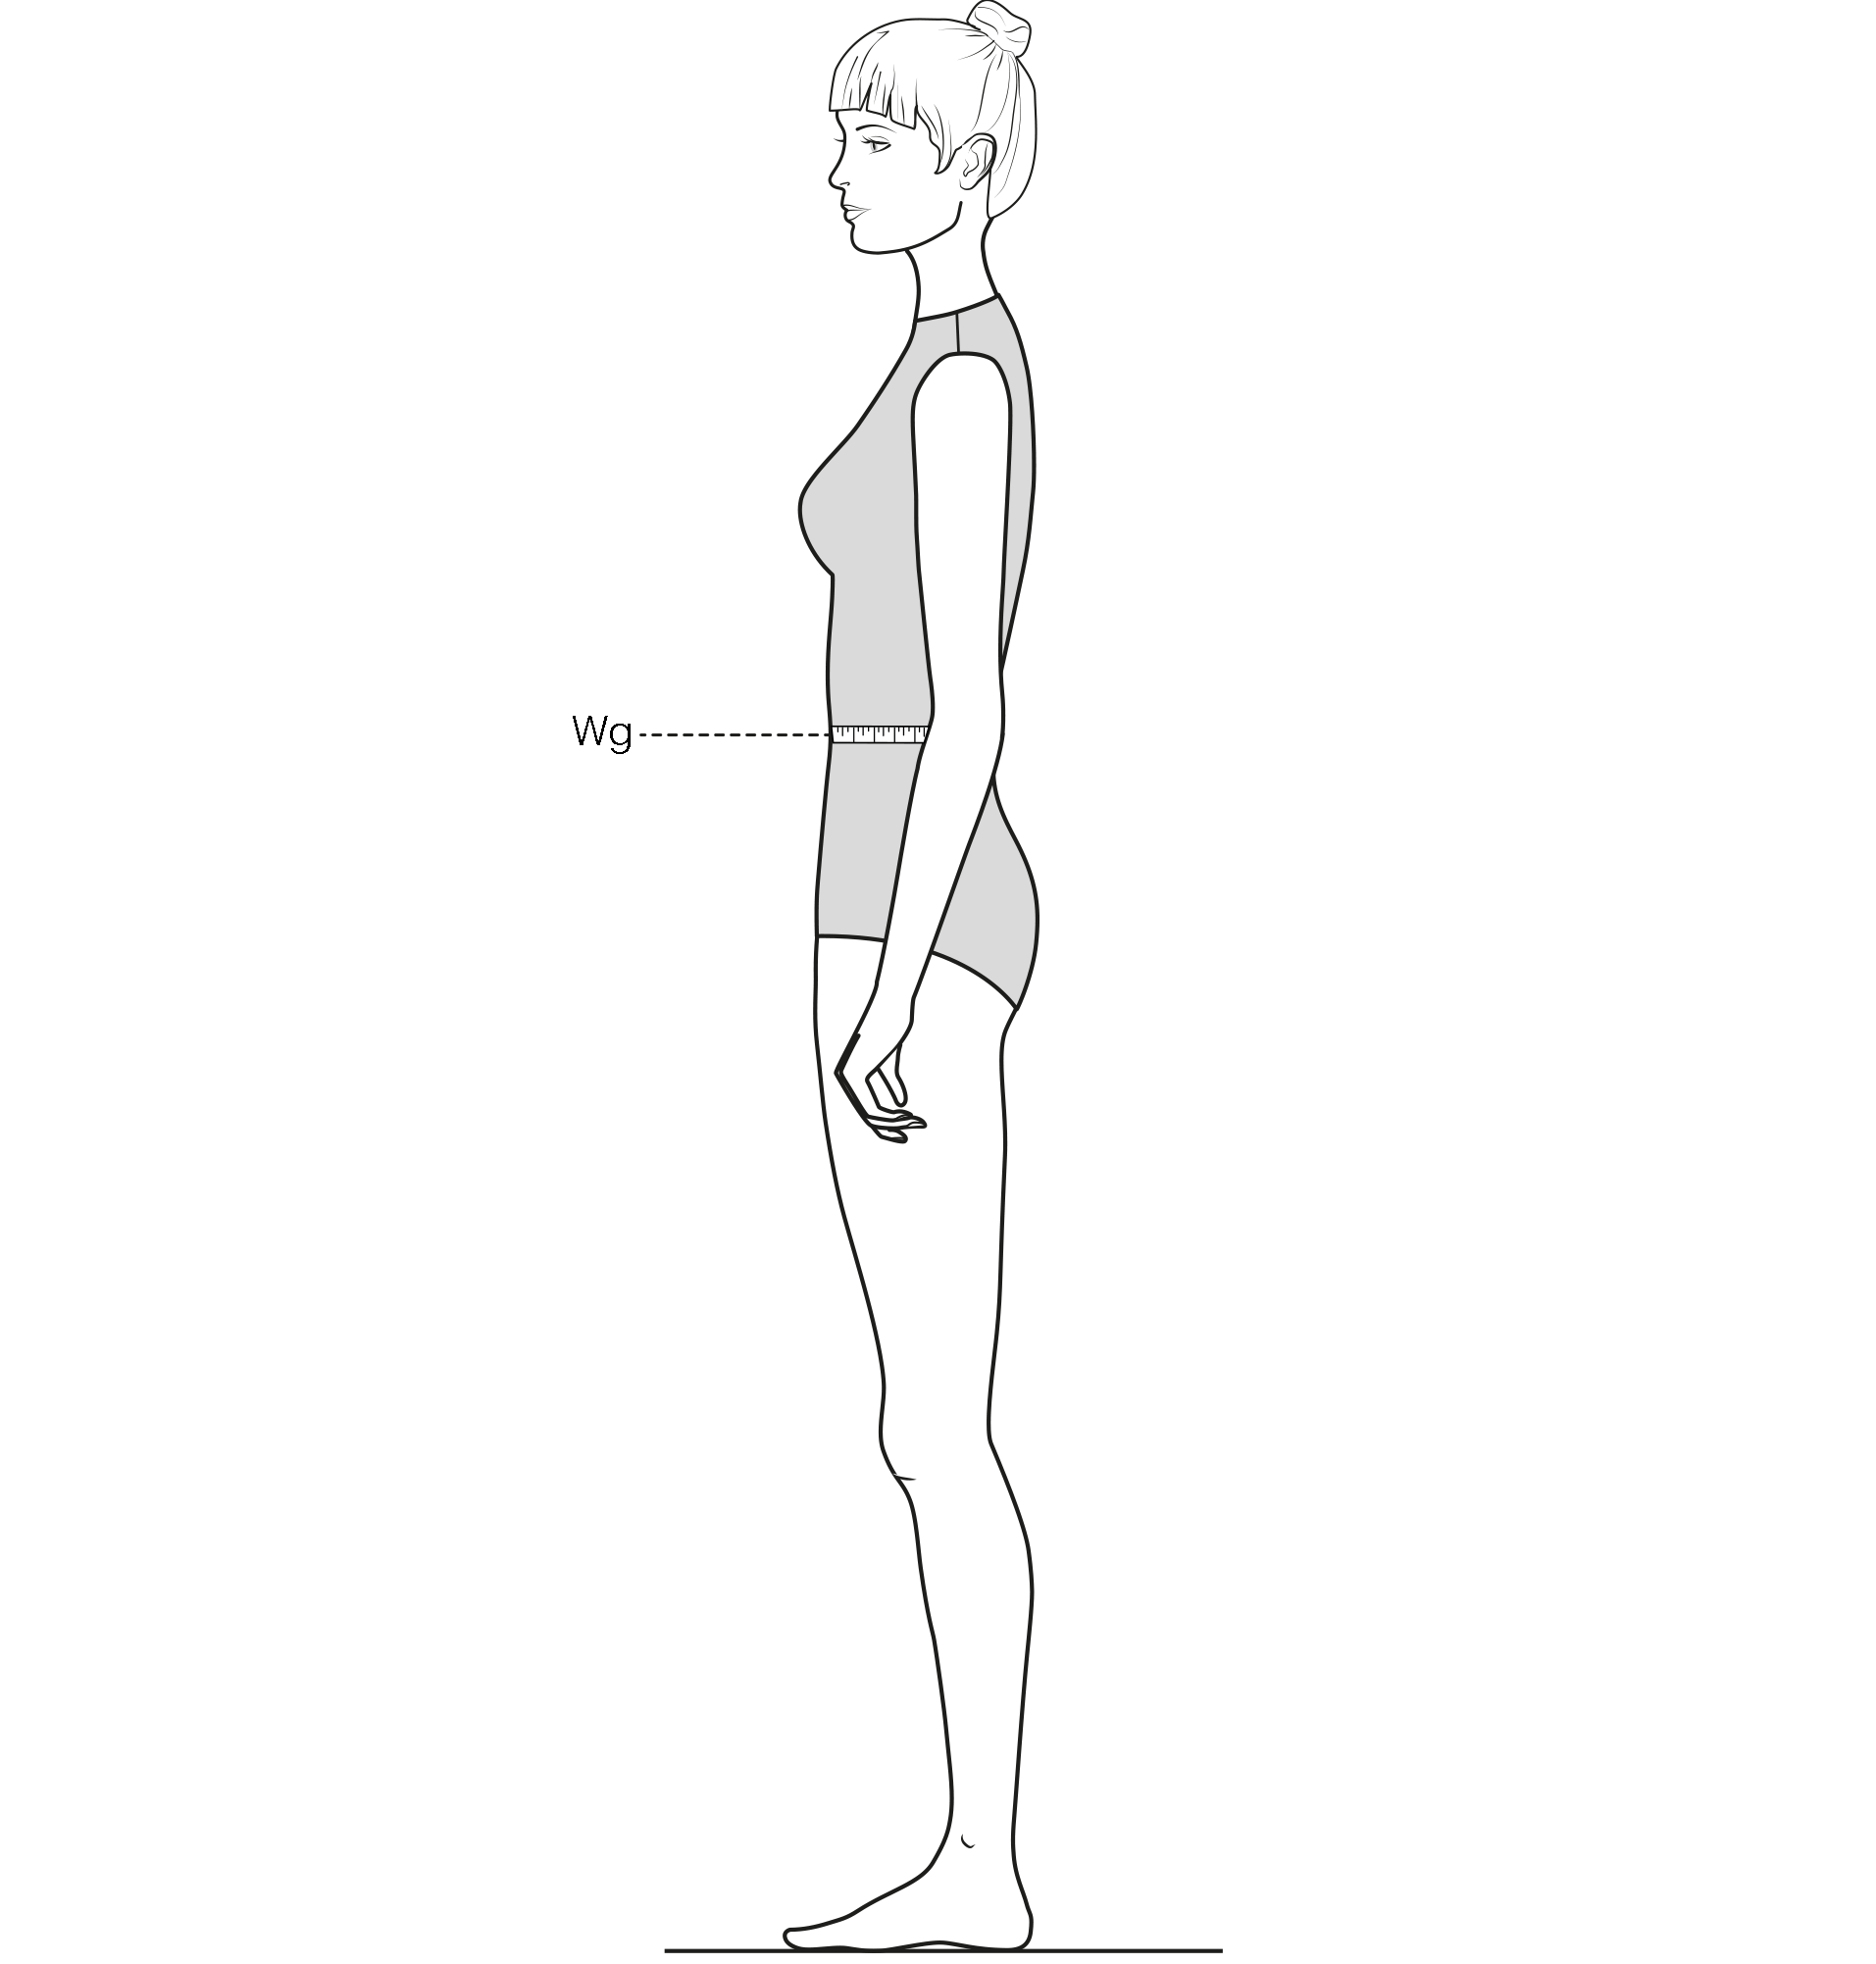 This figure shows the measurement of the Waist girth